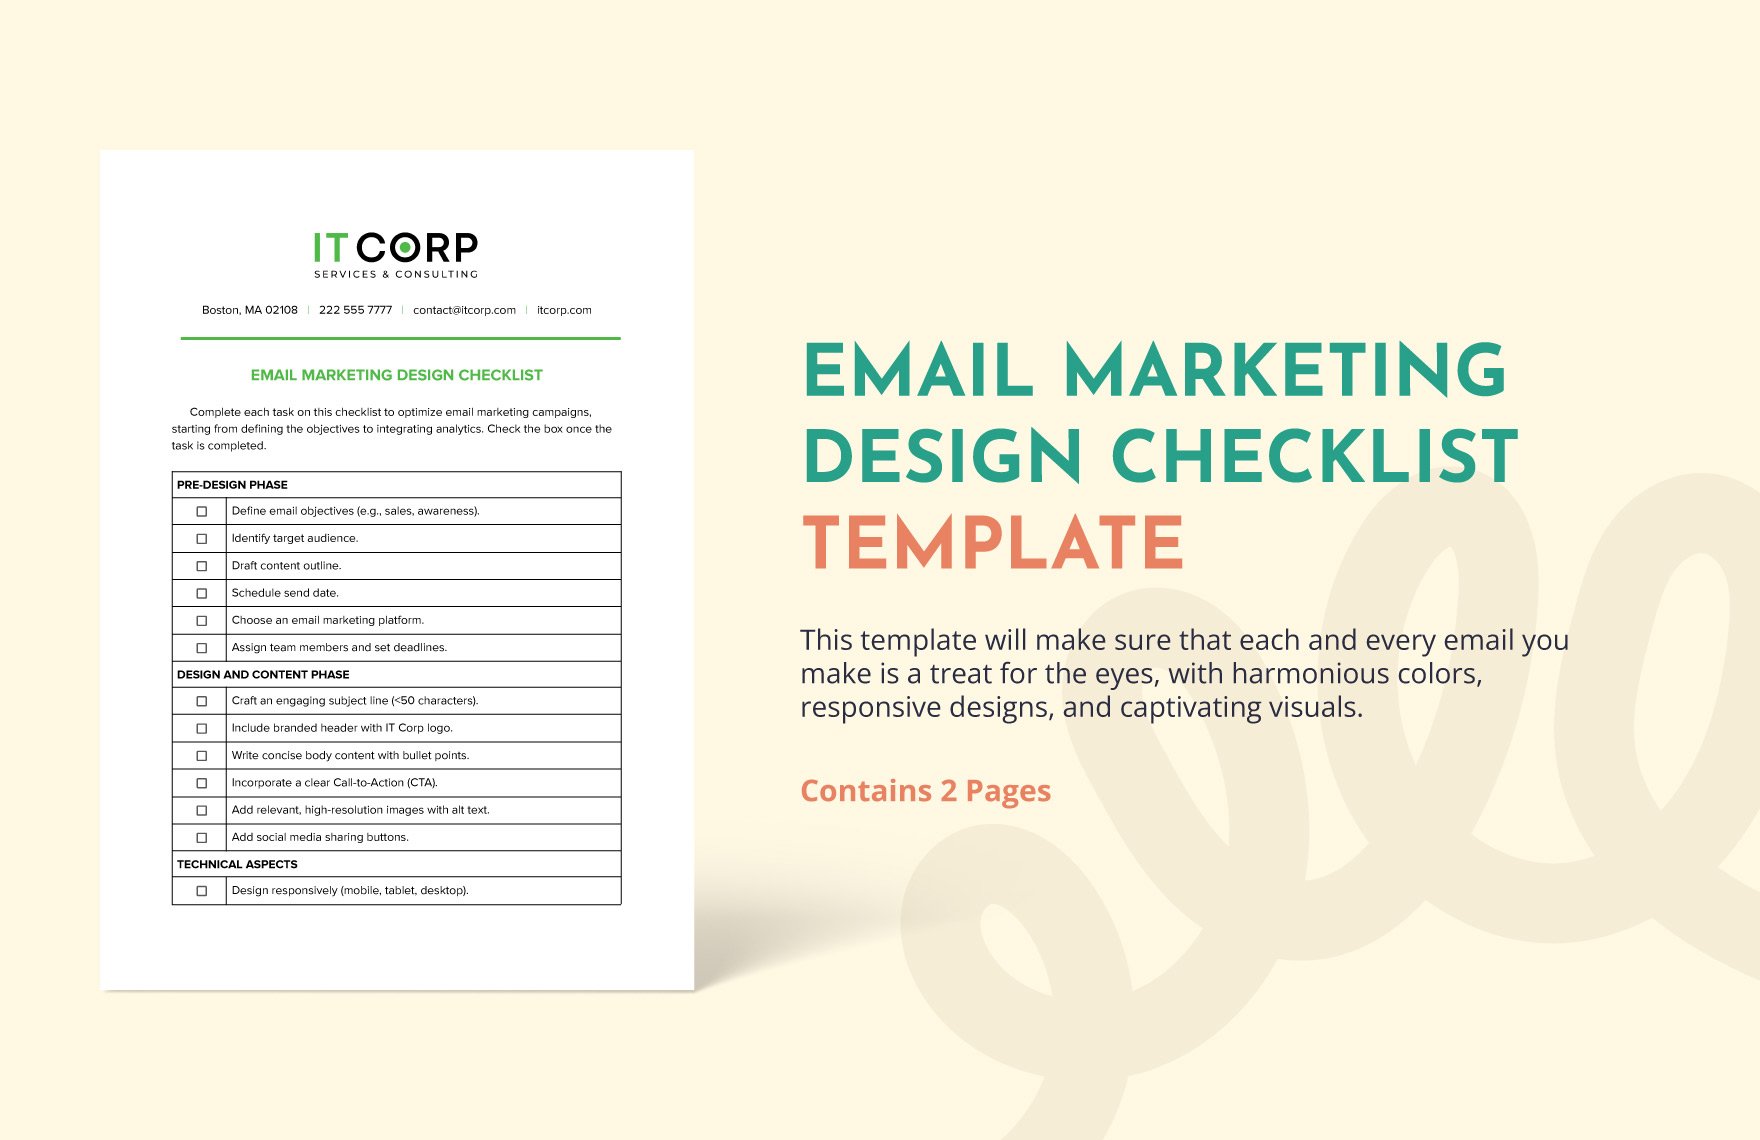 Email Marketing Design Checklist Template in Word, Google Docs, PDF